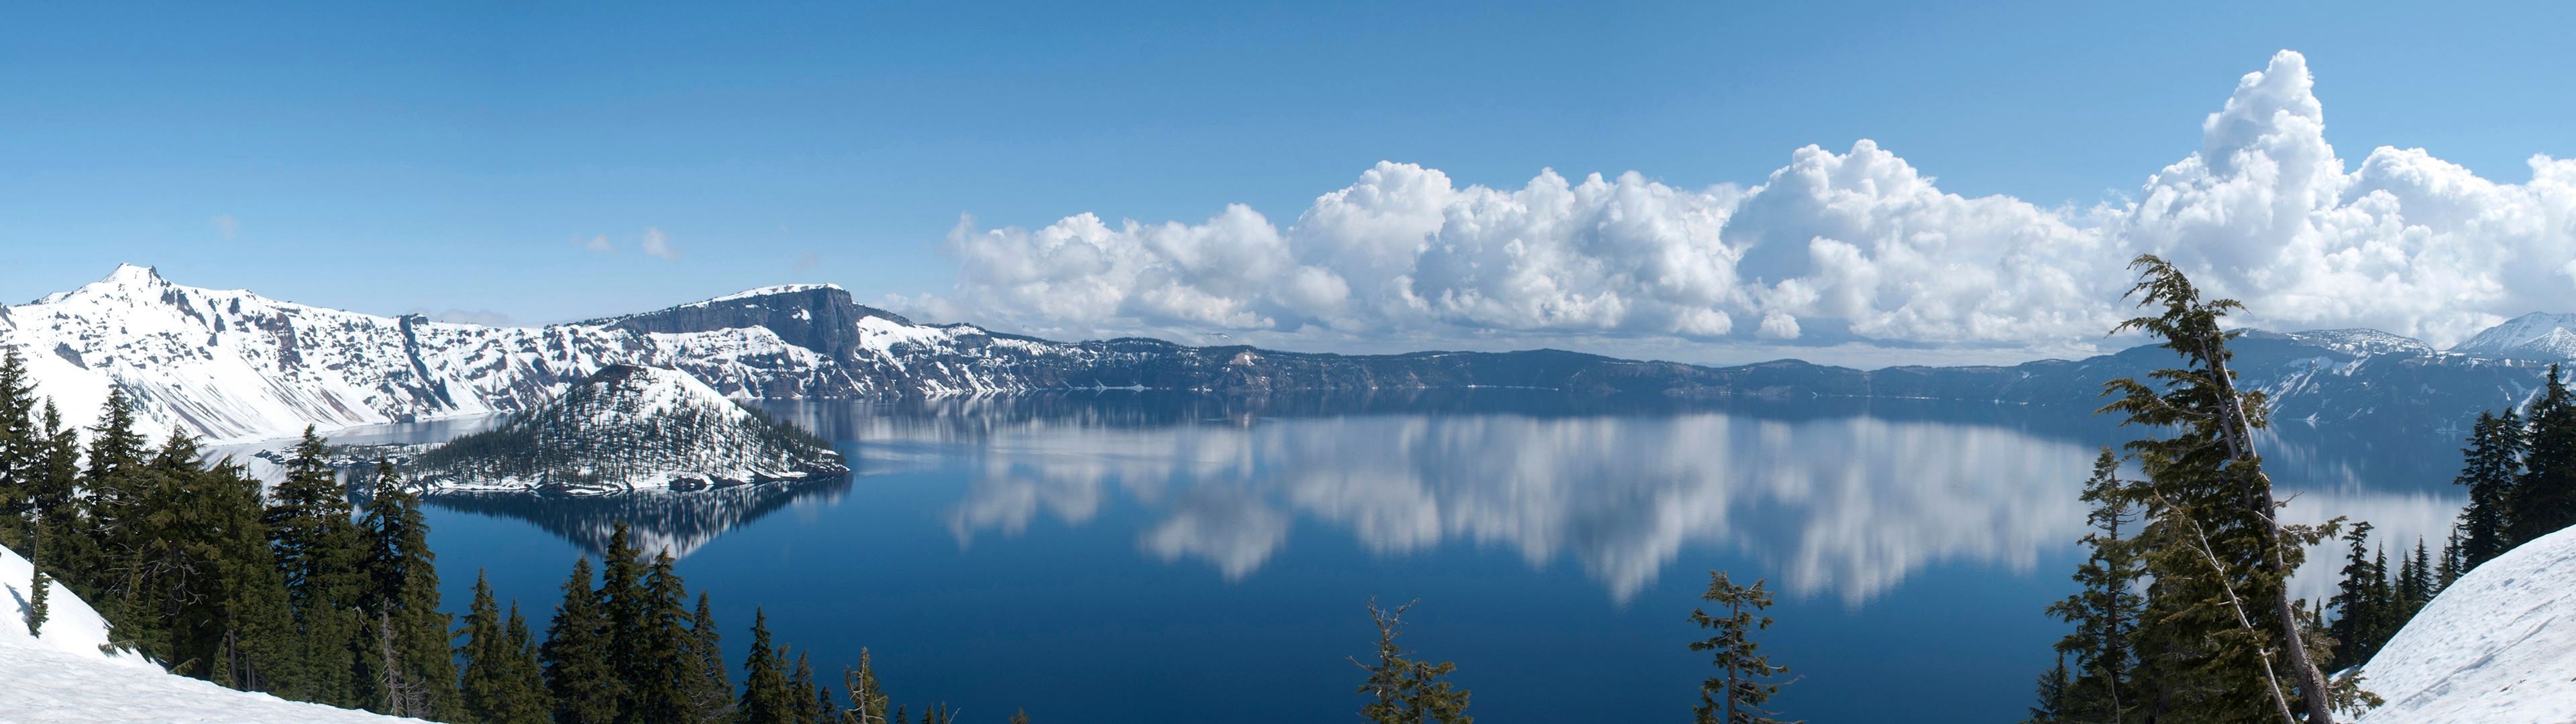 General 3840x1080 landscape lake crater lake clouds reflection multiple display snow dual monitors